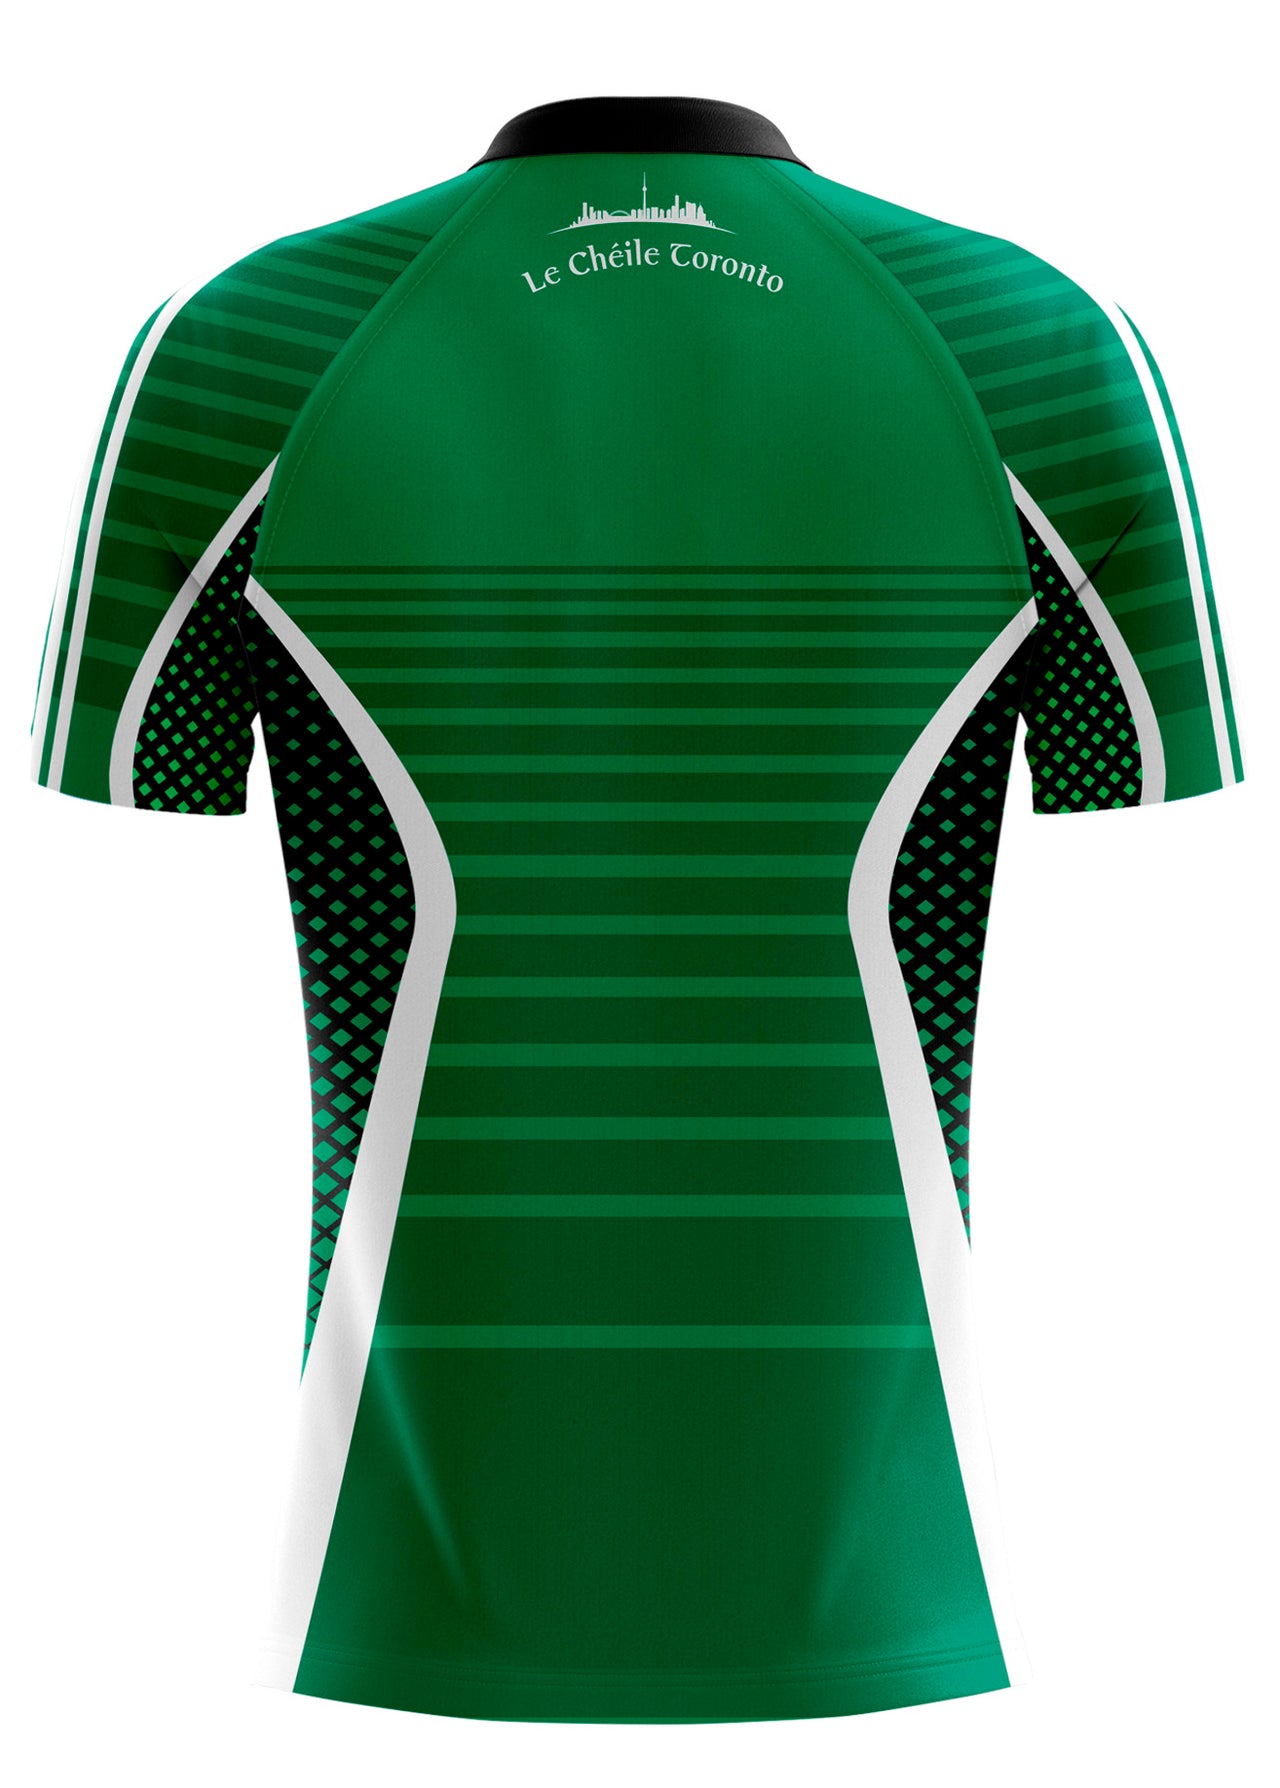 Le Cheile Camogie Home Jersey Player Fit Adult